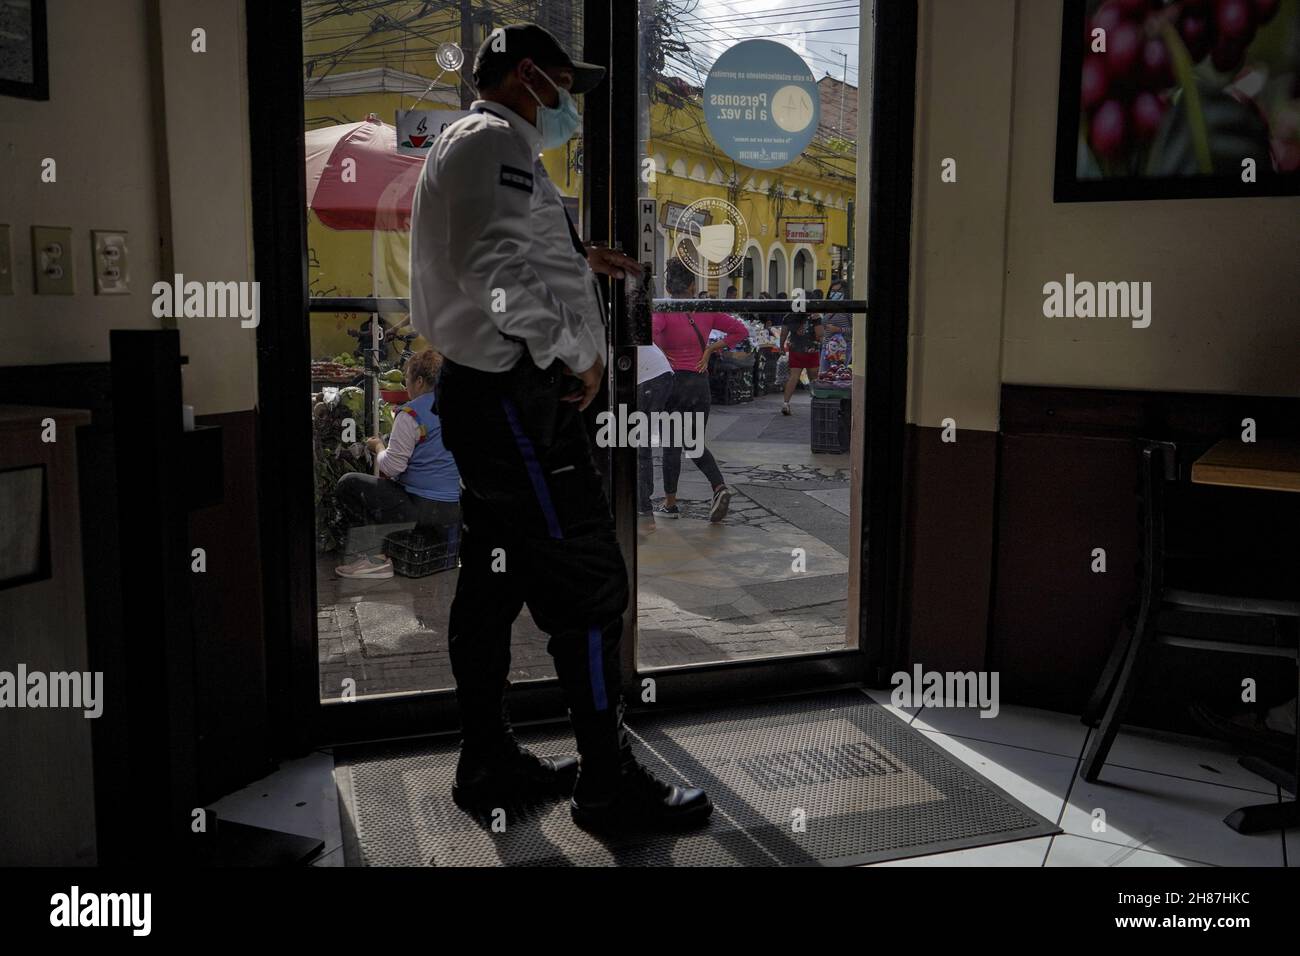 Tegucigalpa, Honduras. 27th Nov, 2021. A security guard checks on people as they walk by a local business amidst fears of looting after the announcement of the election results.The Republic of Honduras will hold general elections to choose a new set of president, congress, and municipal government leaders. (Photo by Camilo Freedman/SOPA Images/Sipa USA) Credit: Sipa USA/Alamy Live News Stock Photo